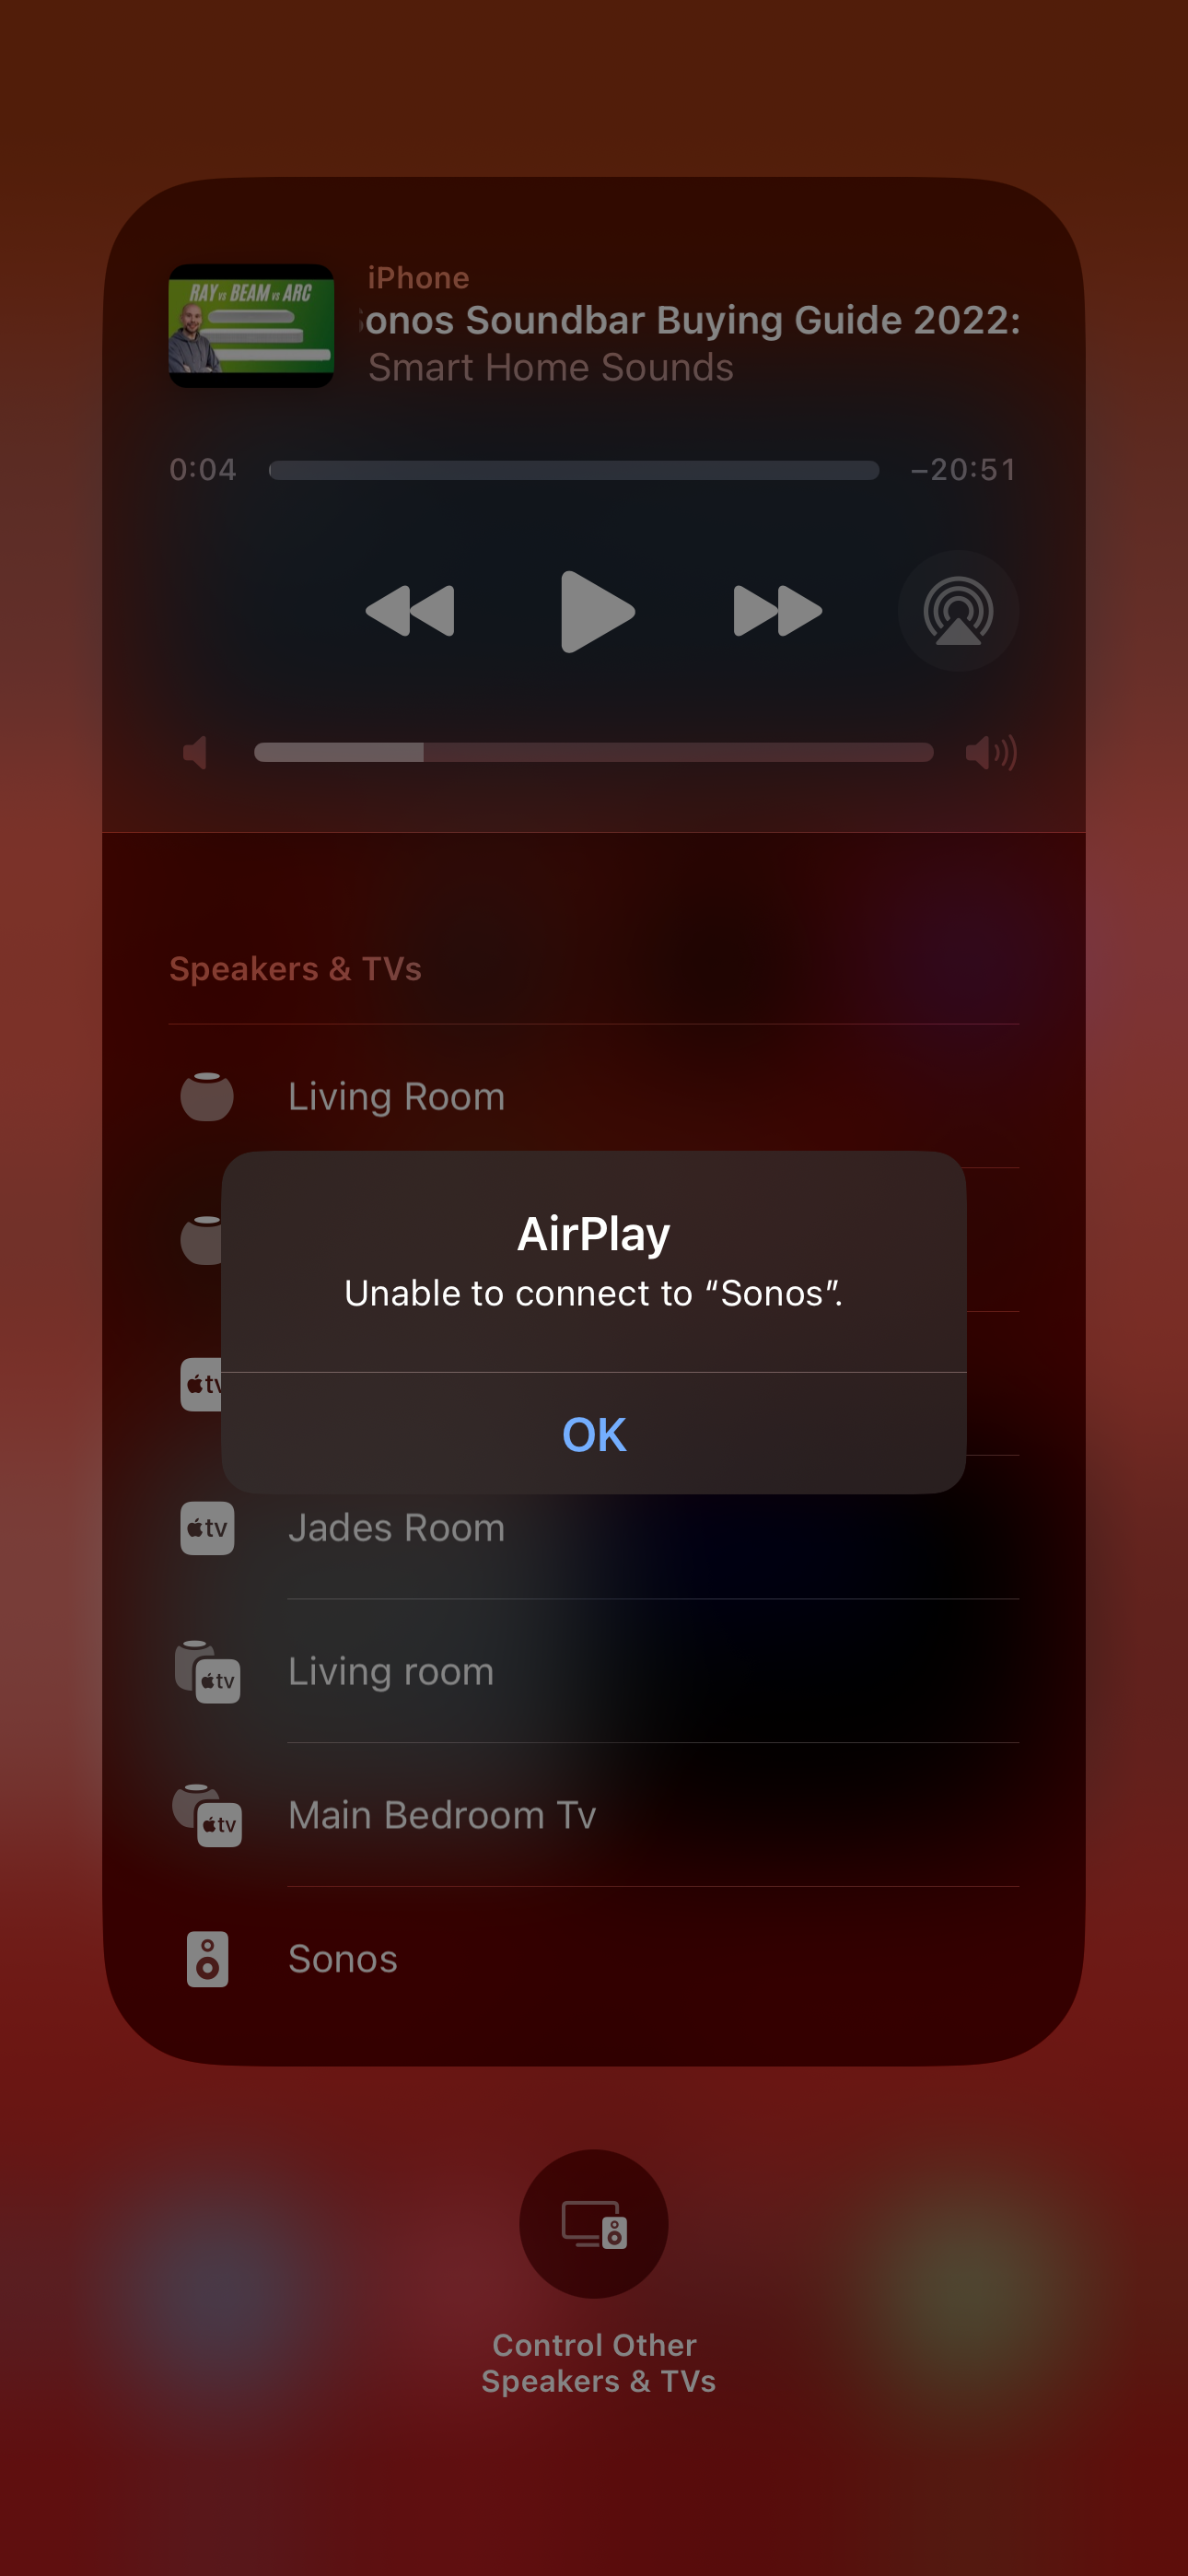 skjorte at føre lektier Sonos system dropping to iphone since iOS 16 update | Sonos Community